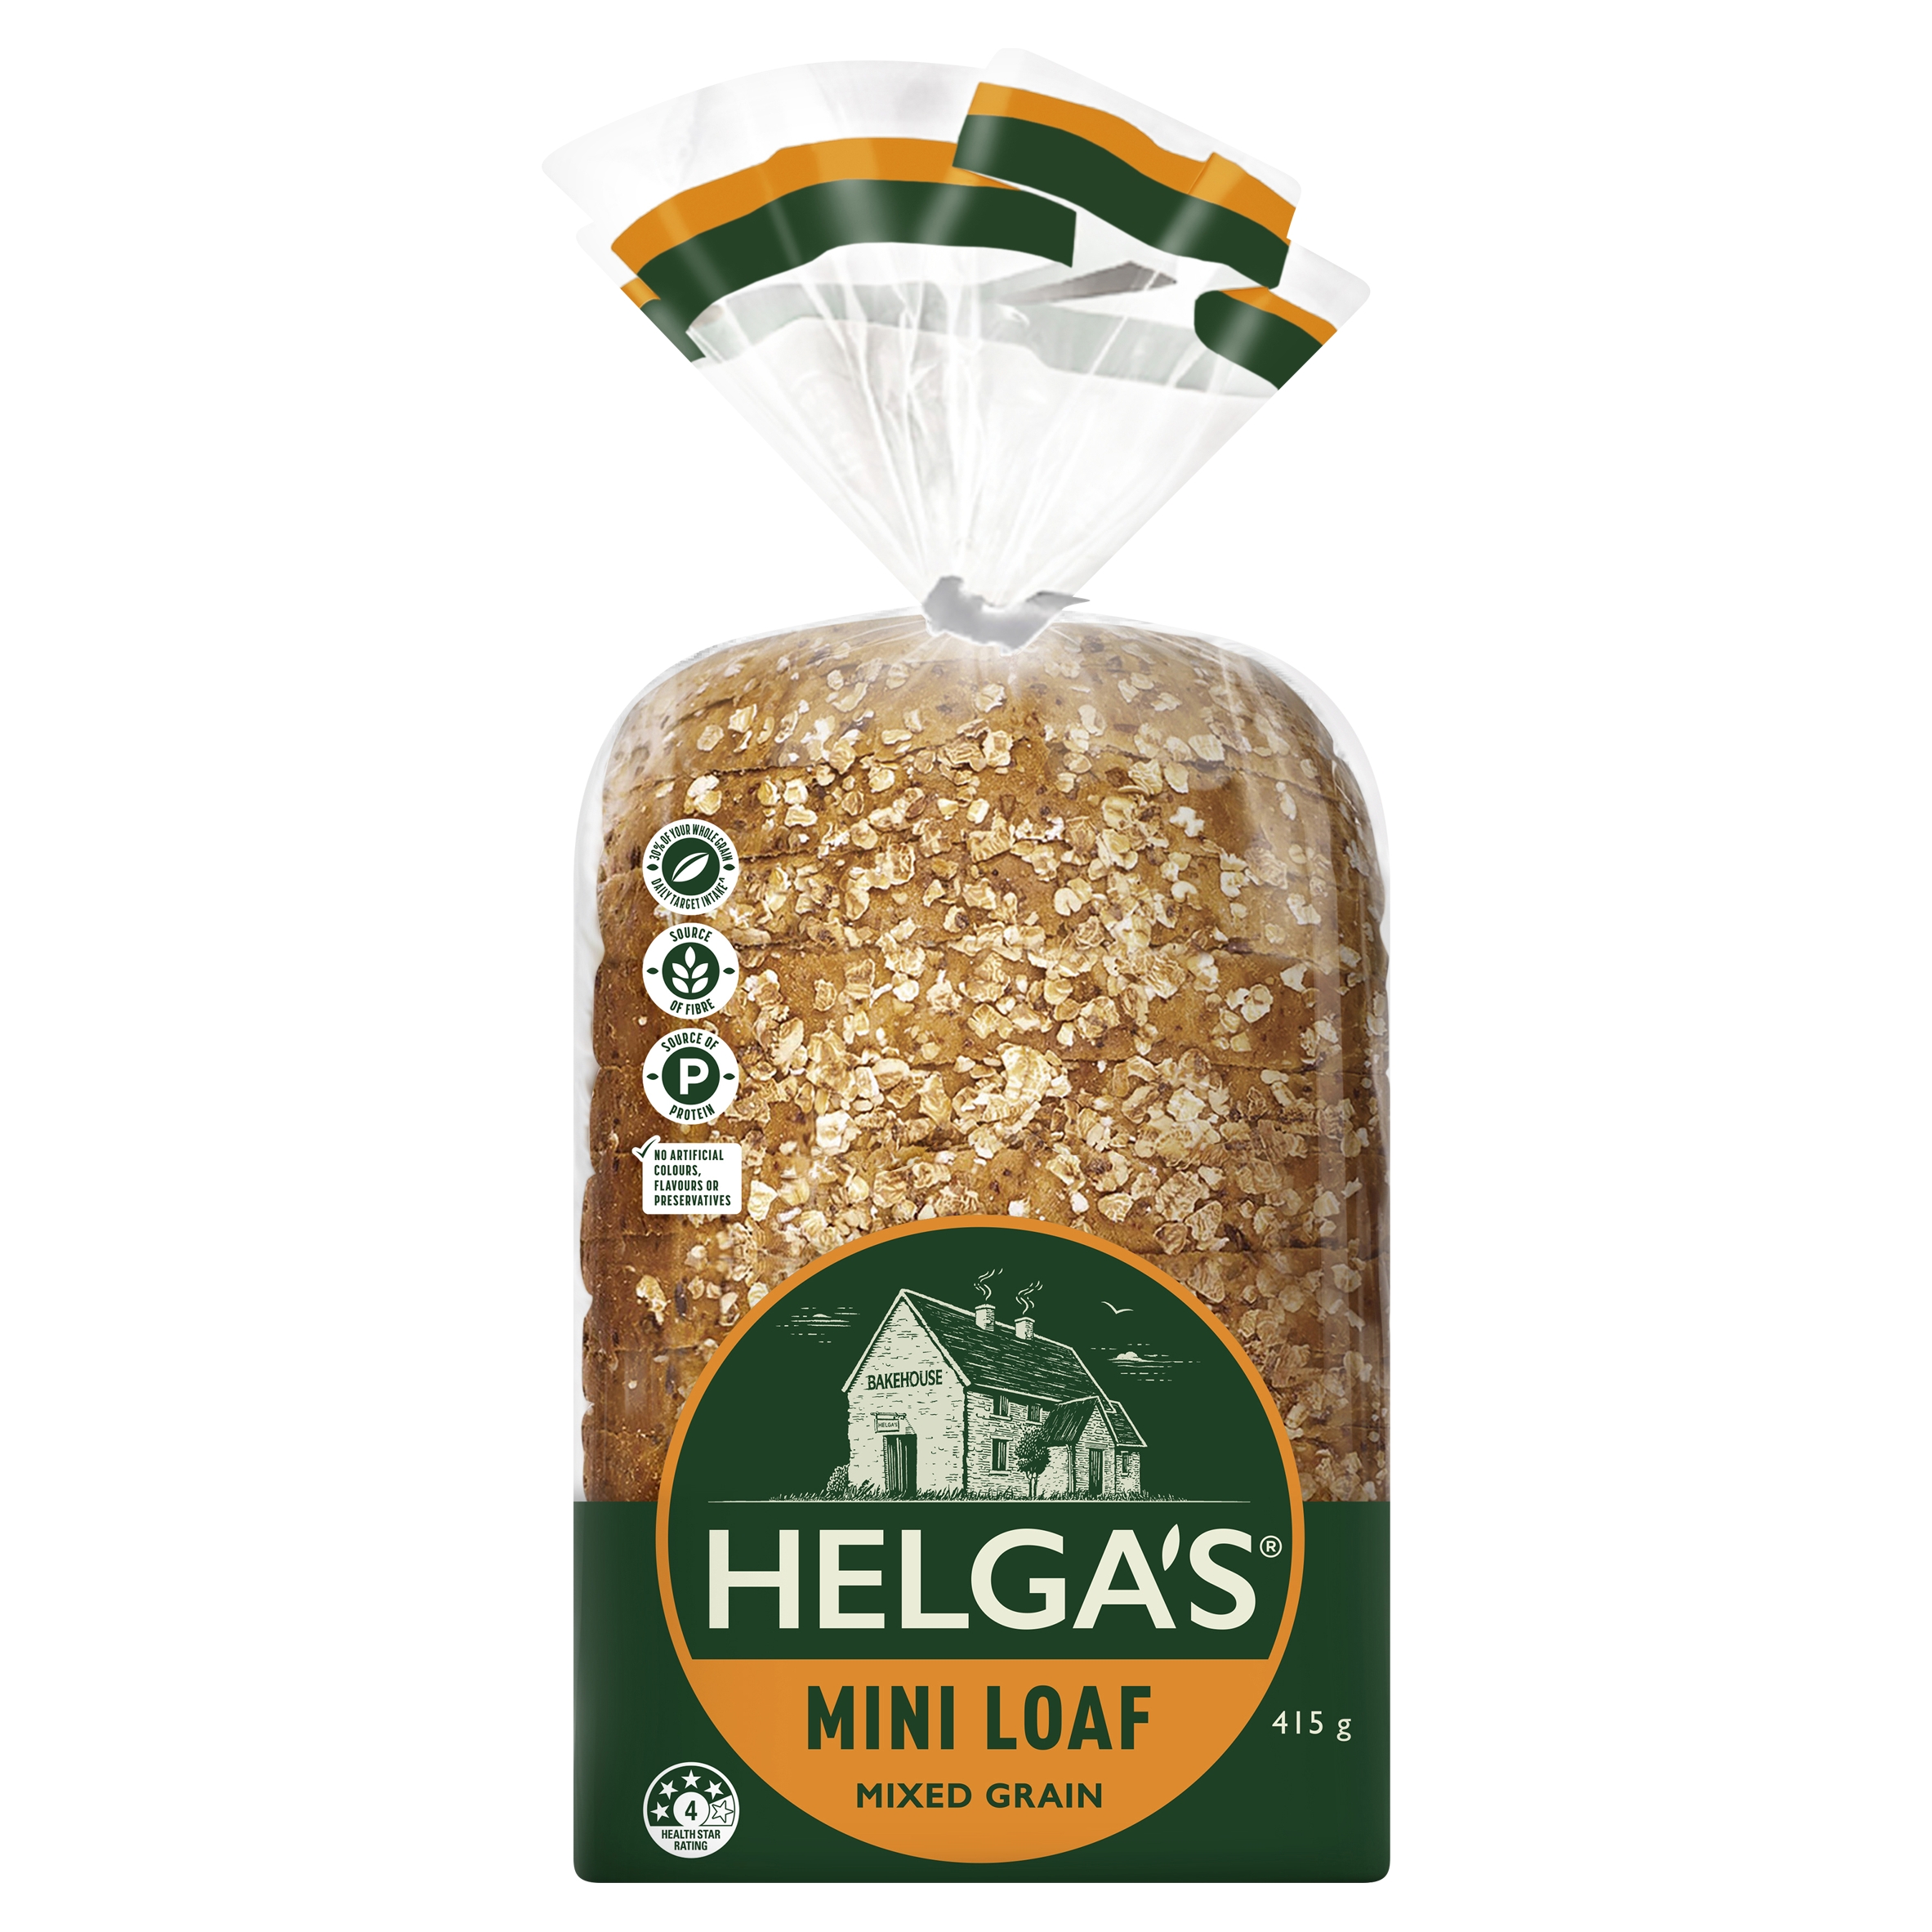 Helgas Loaf Mixed Grain Mini 415 g product photo